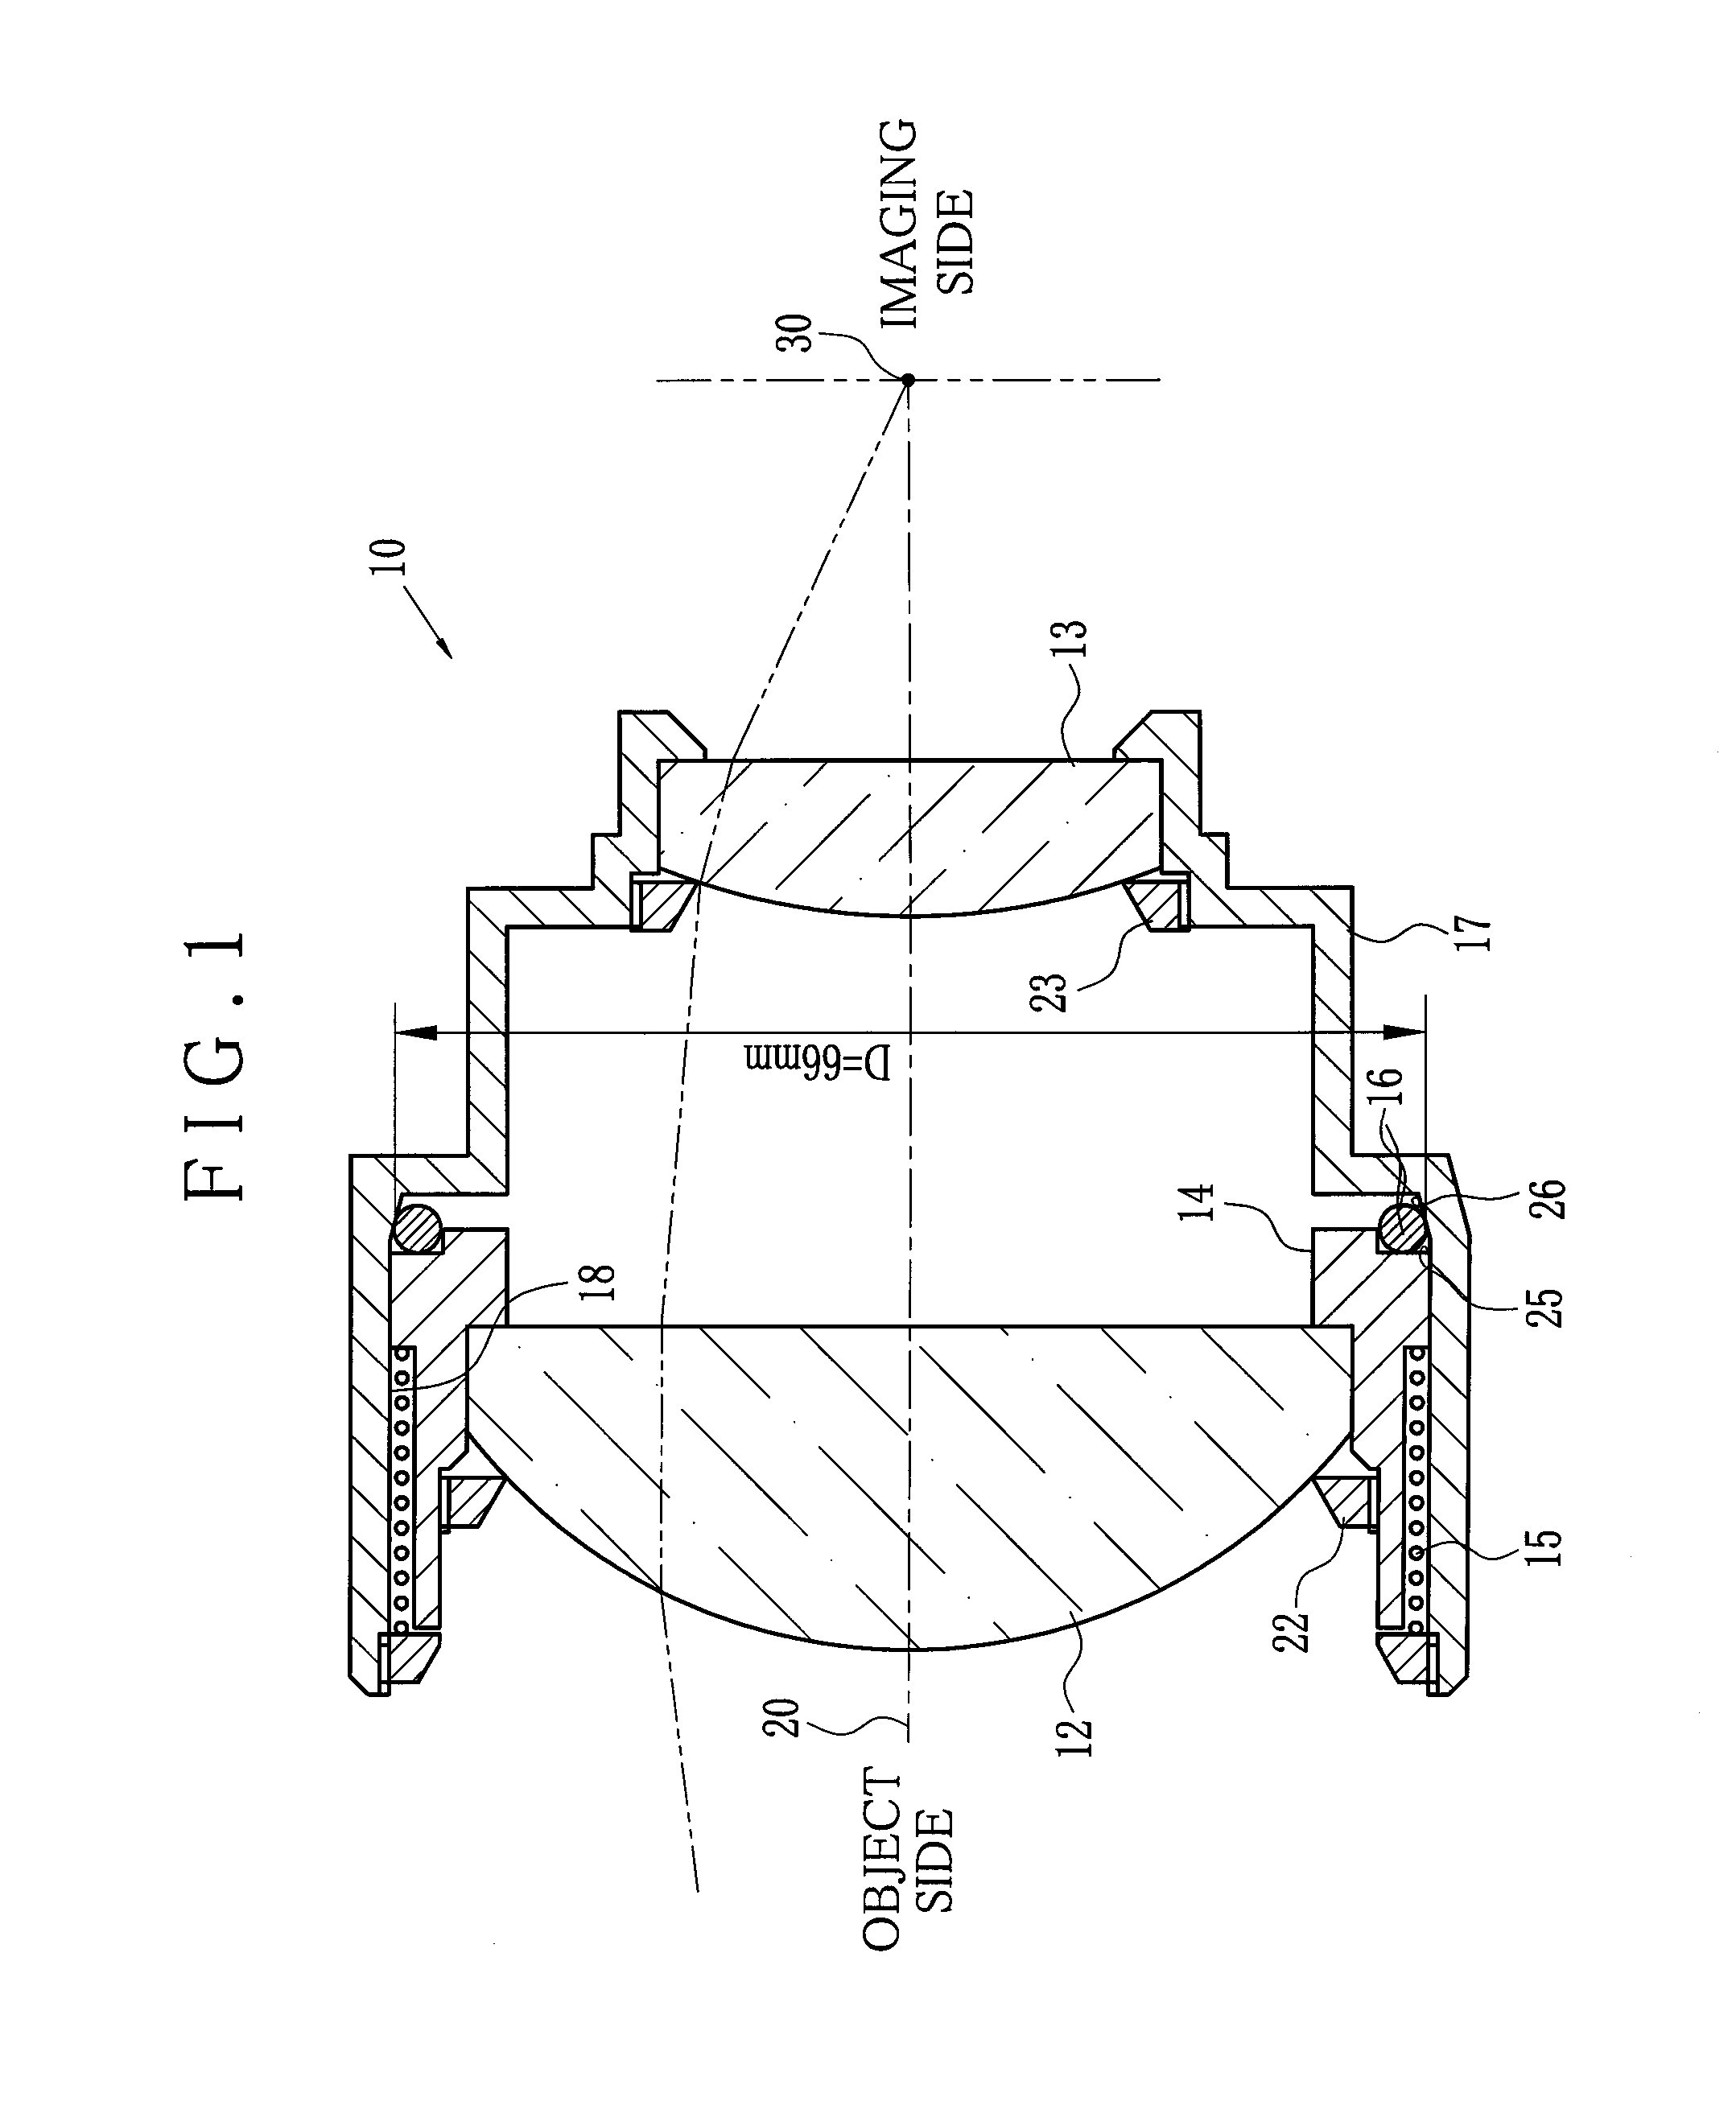  athermal lens device